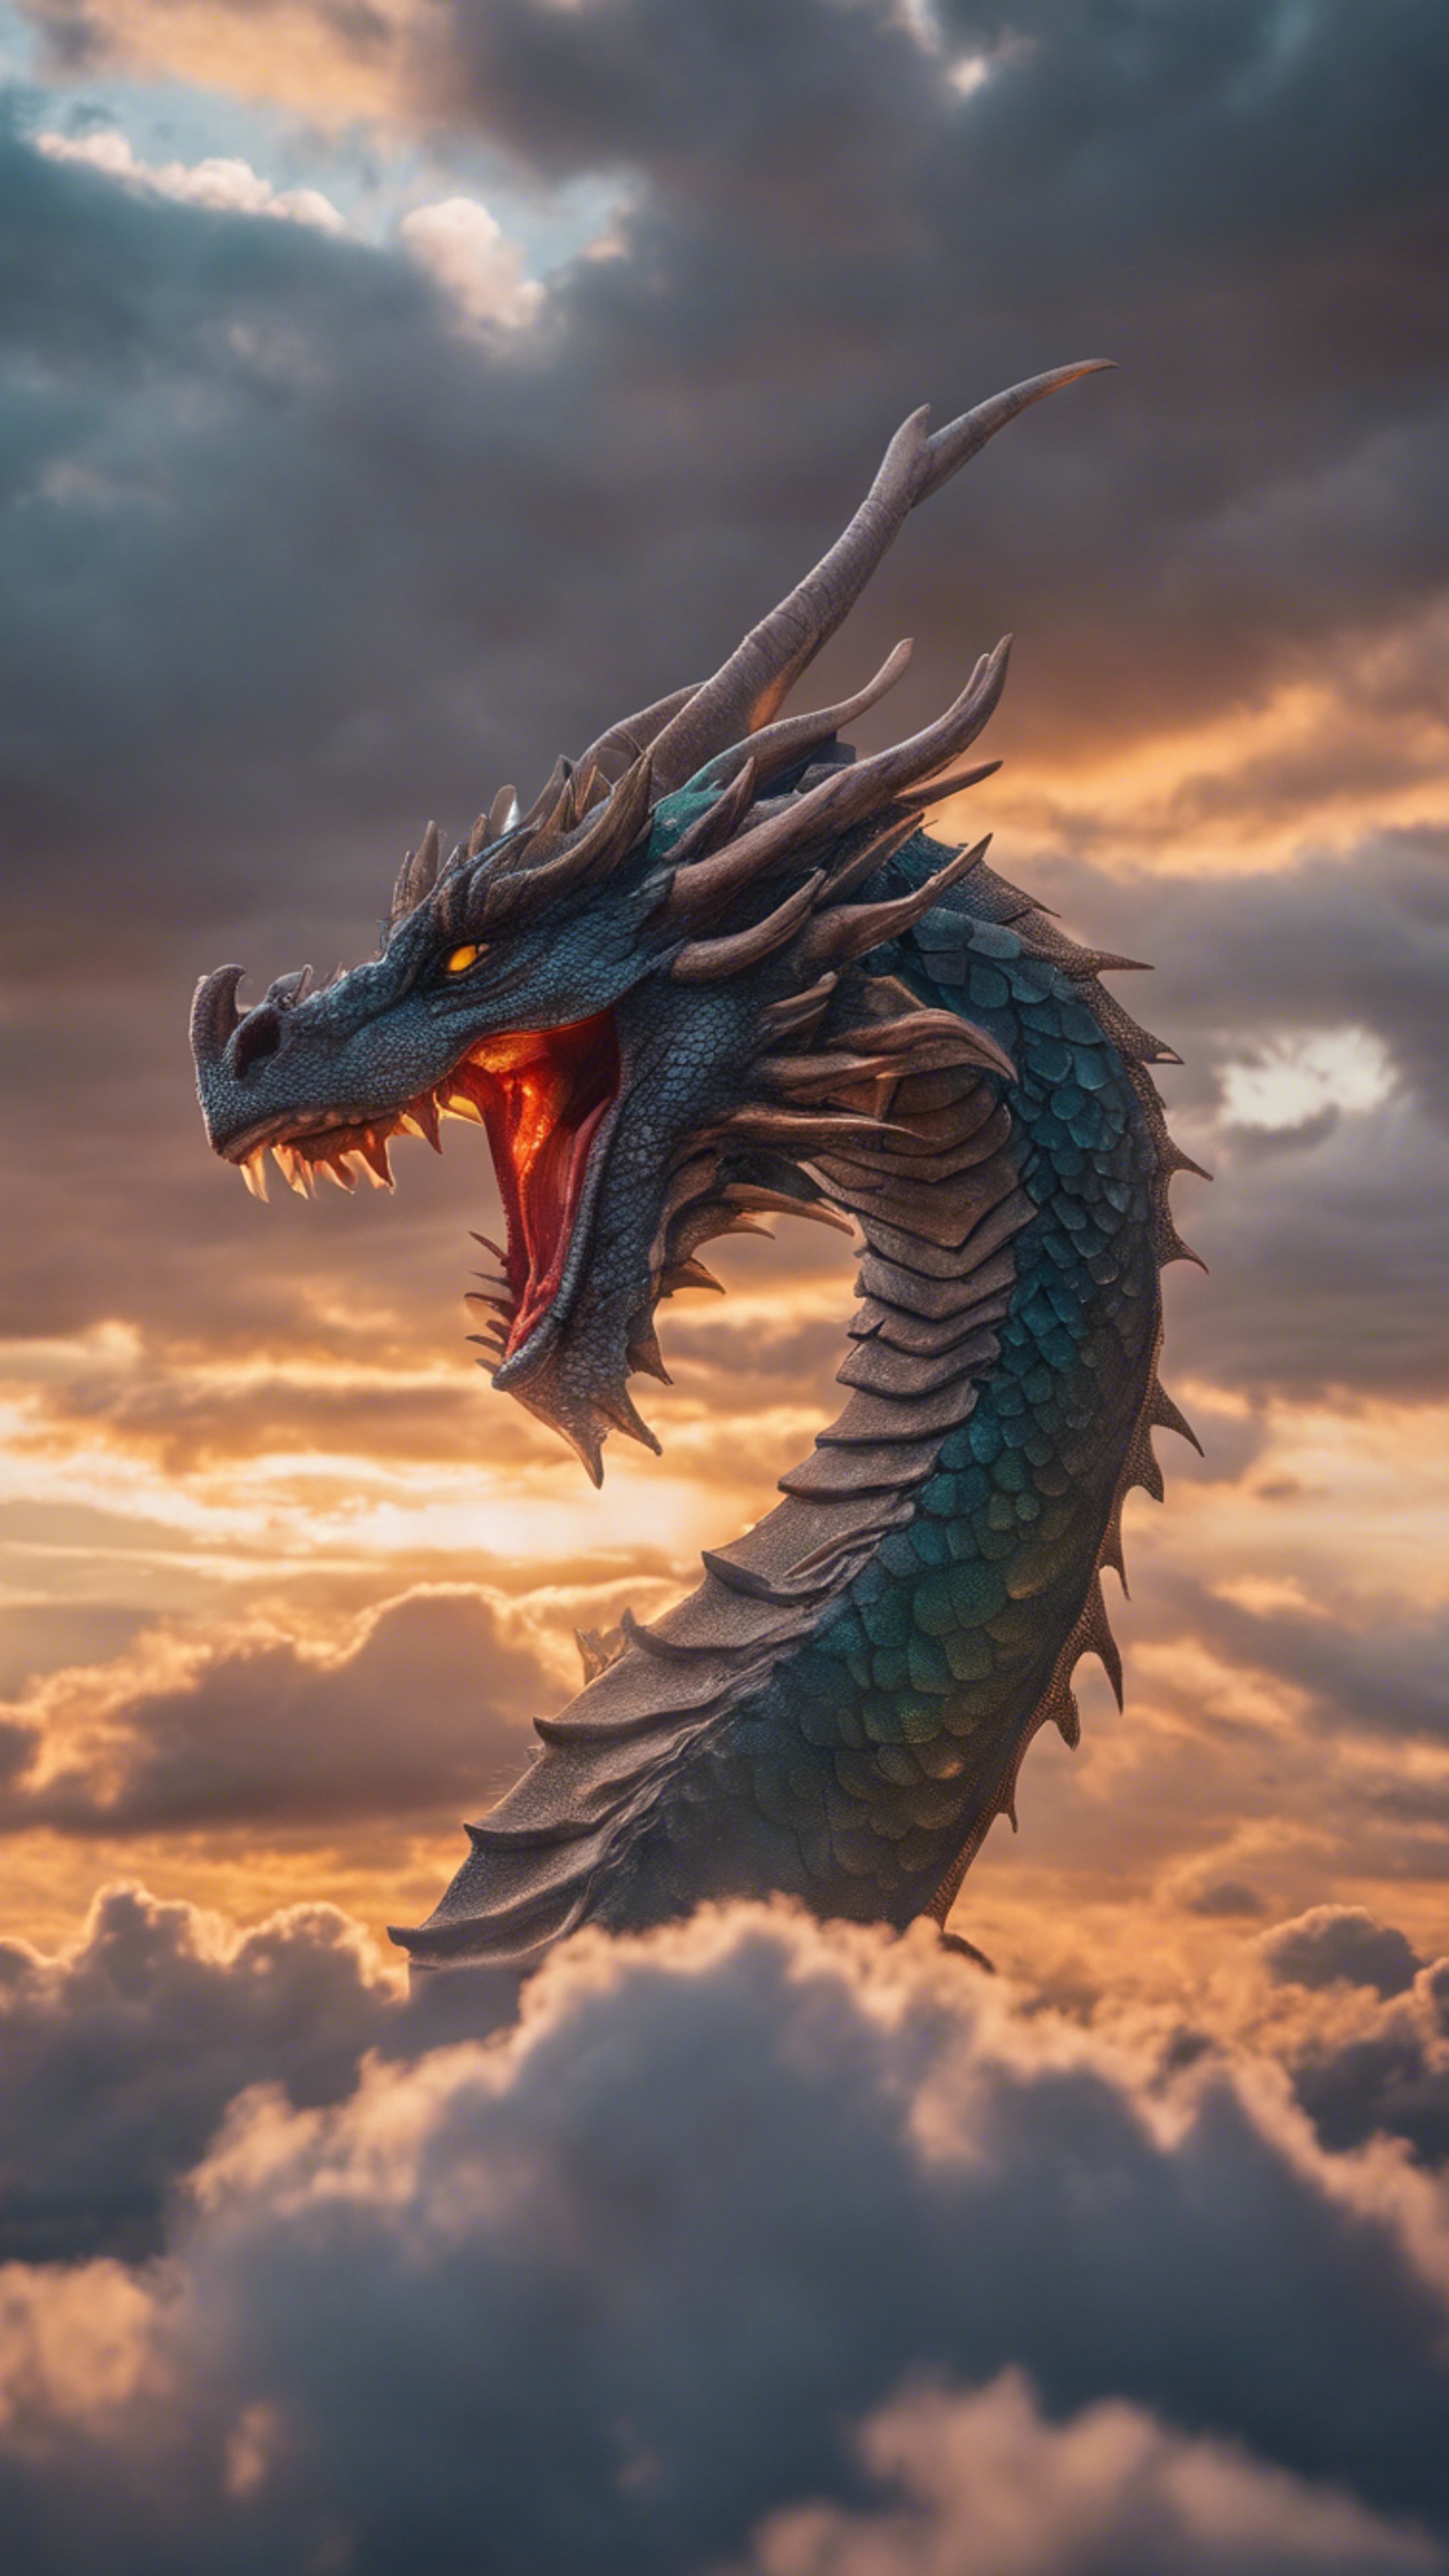 A dragon of pure light breaking through the clouds as the sun sets, its scales reflecting the vibrant colors of dusk. 벽지[43b0d43f7e0c44e88acd]